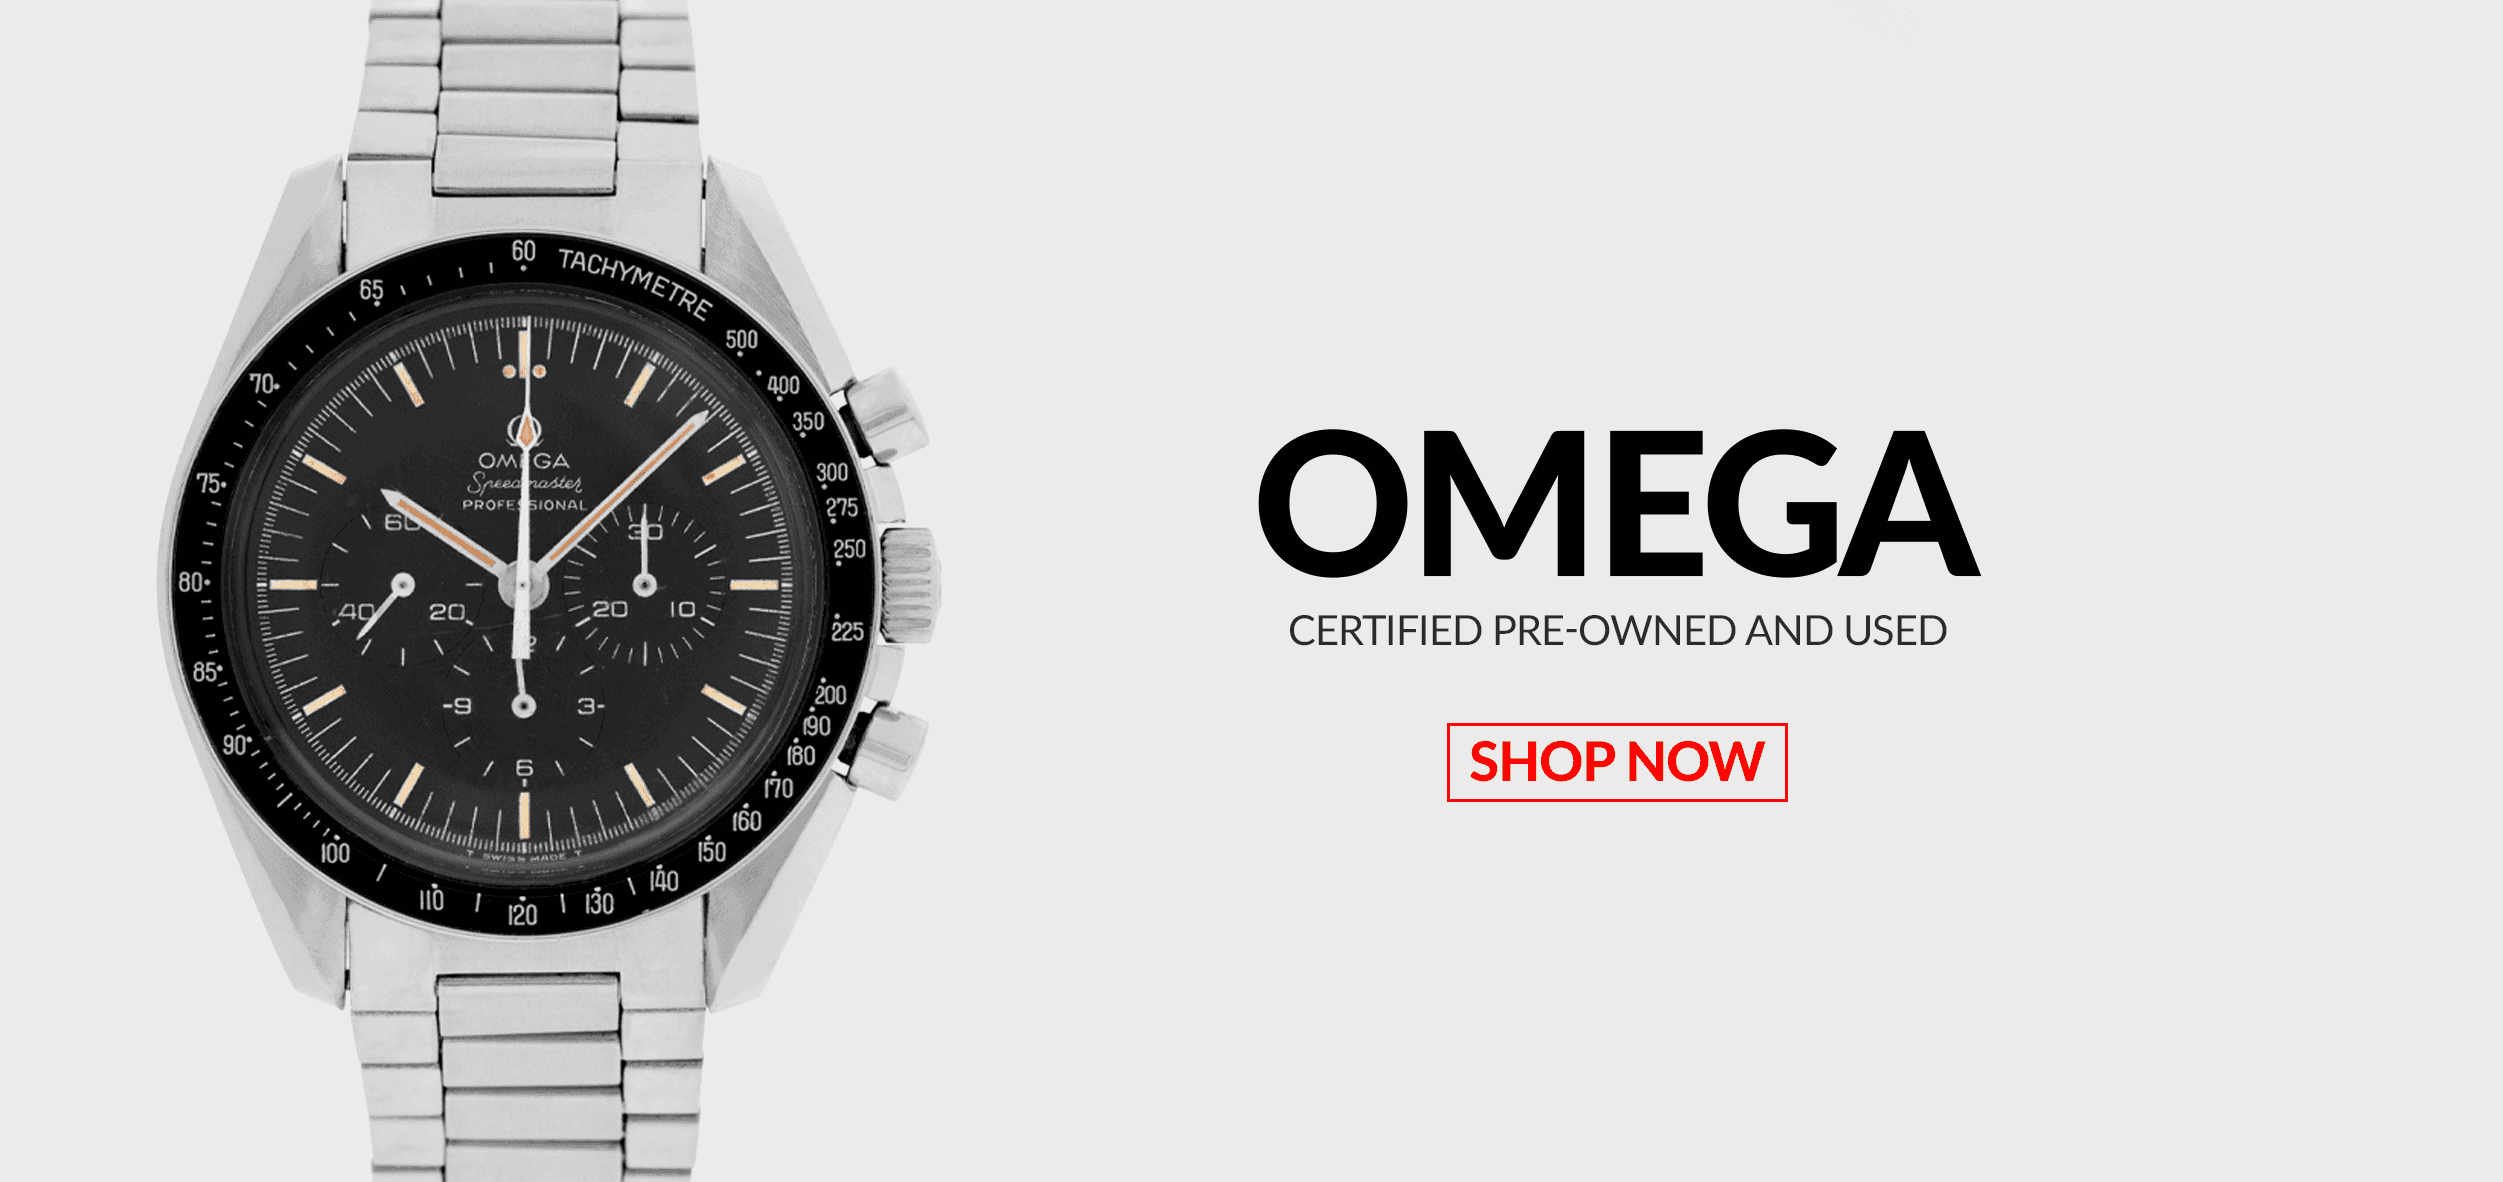 Pre-Owned Certified Used Omega Watches Header